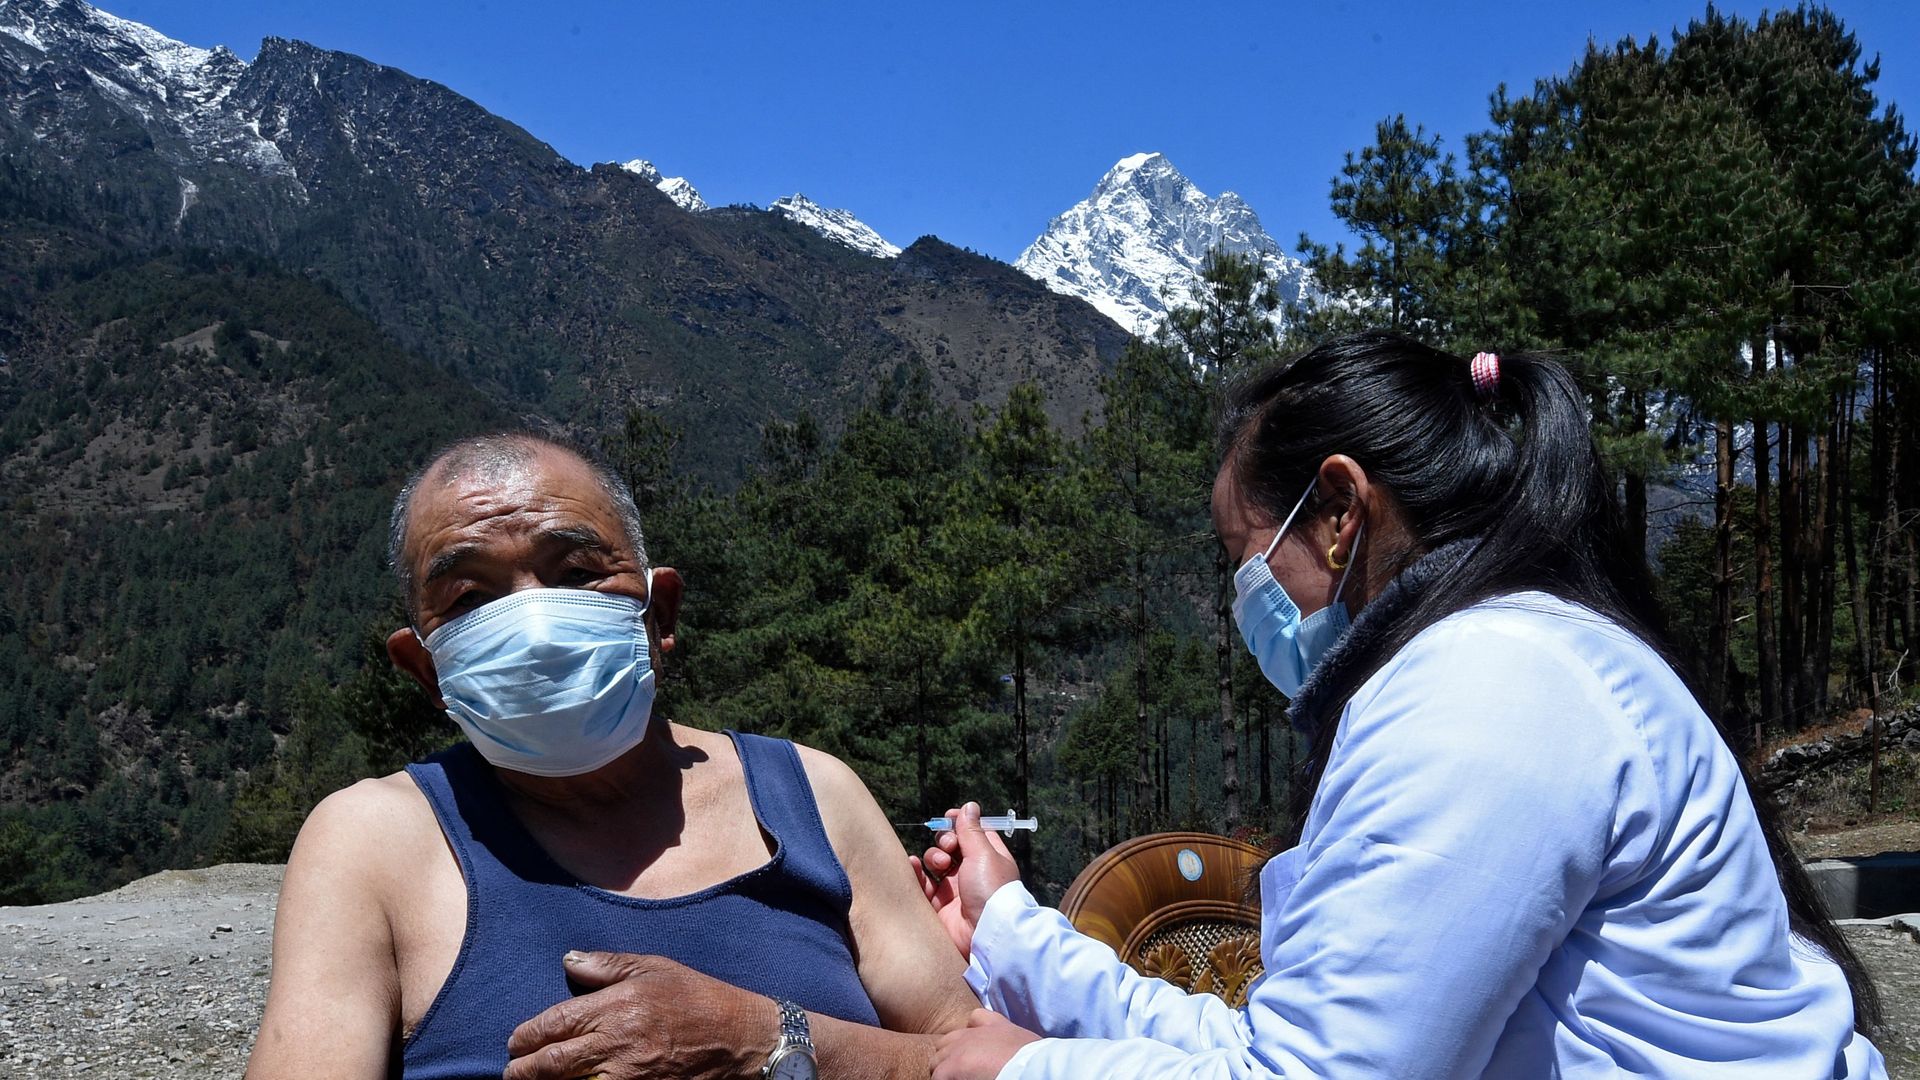  A health worker inoculates a man with the dose of Covishield vaccine against the Covid-19 coronavirus at a health post near Lukla on April 23